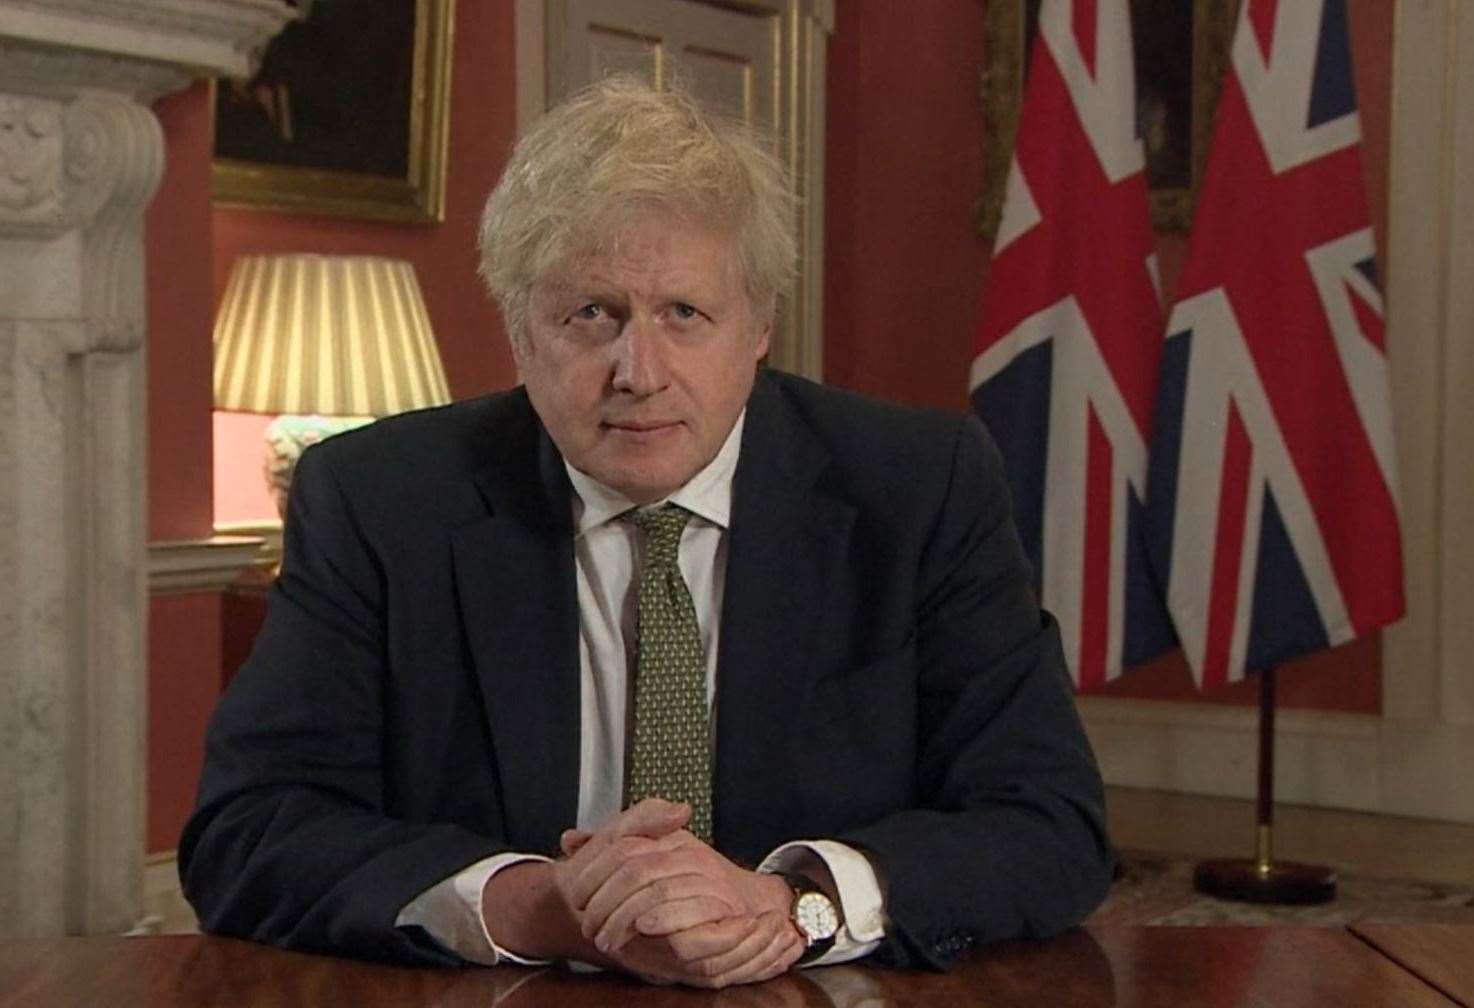 Boris Johnson rose to the highest position in government – despite the odds